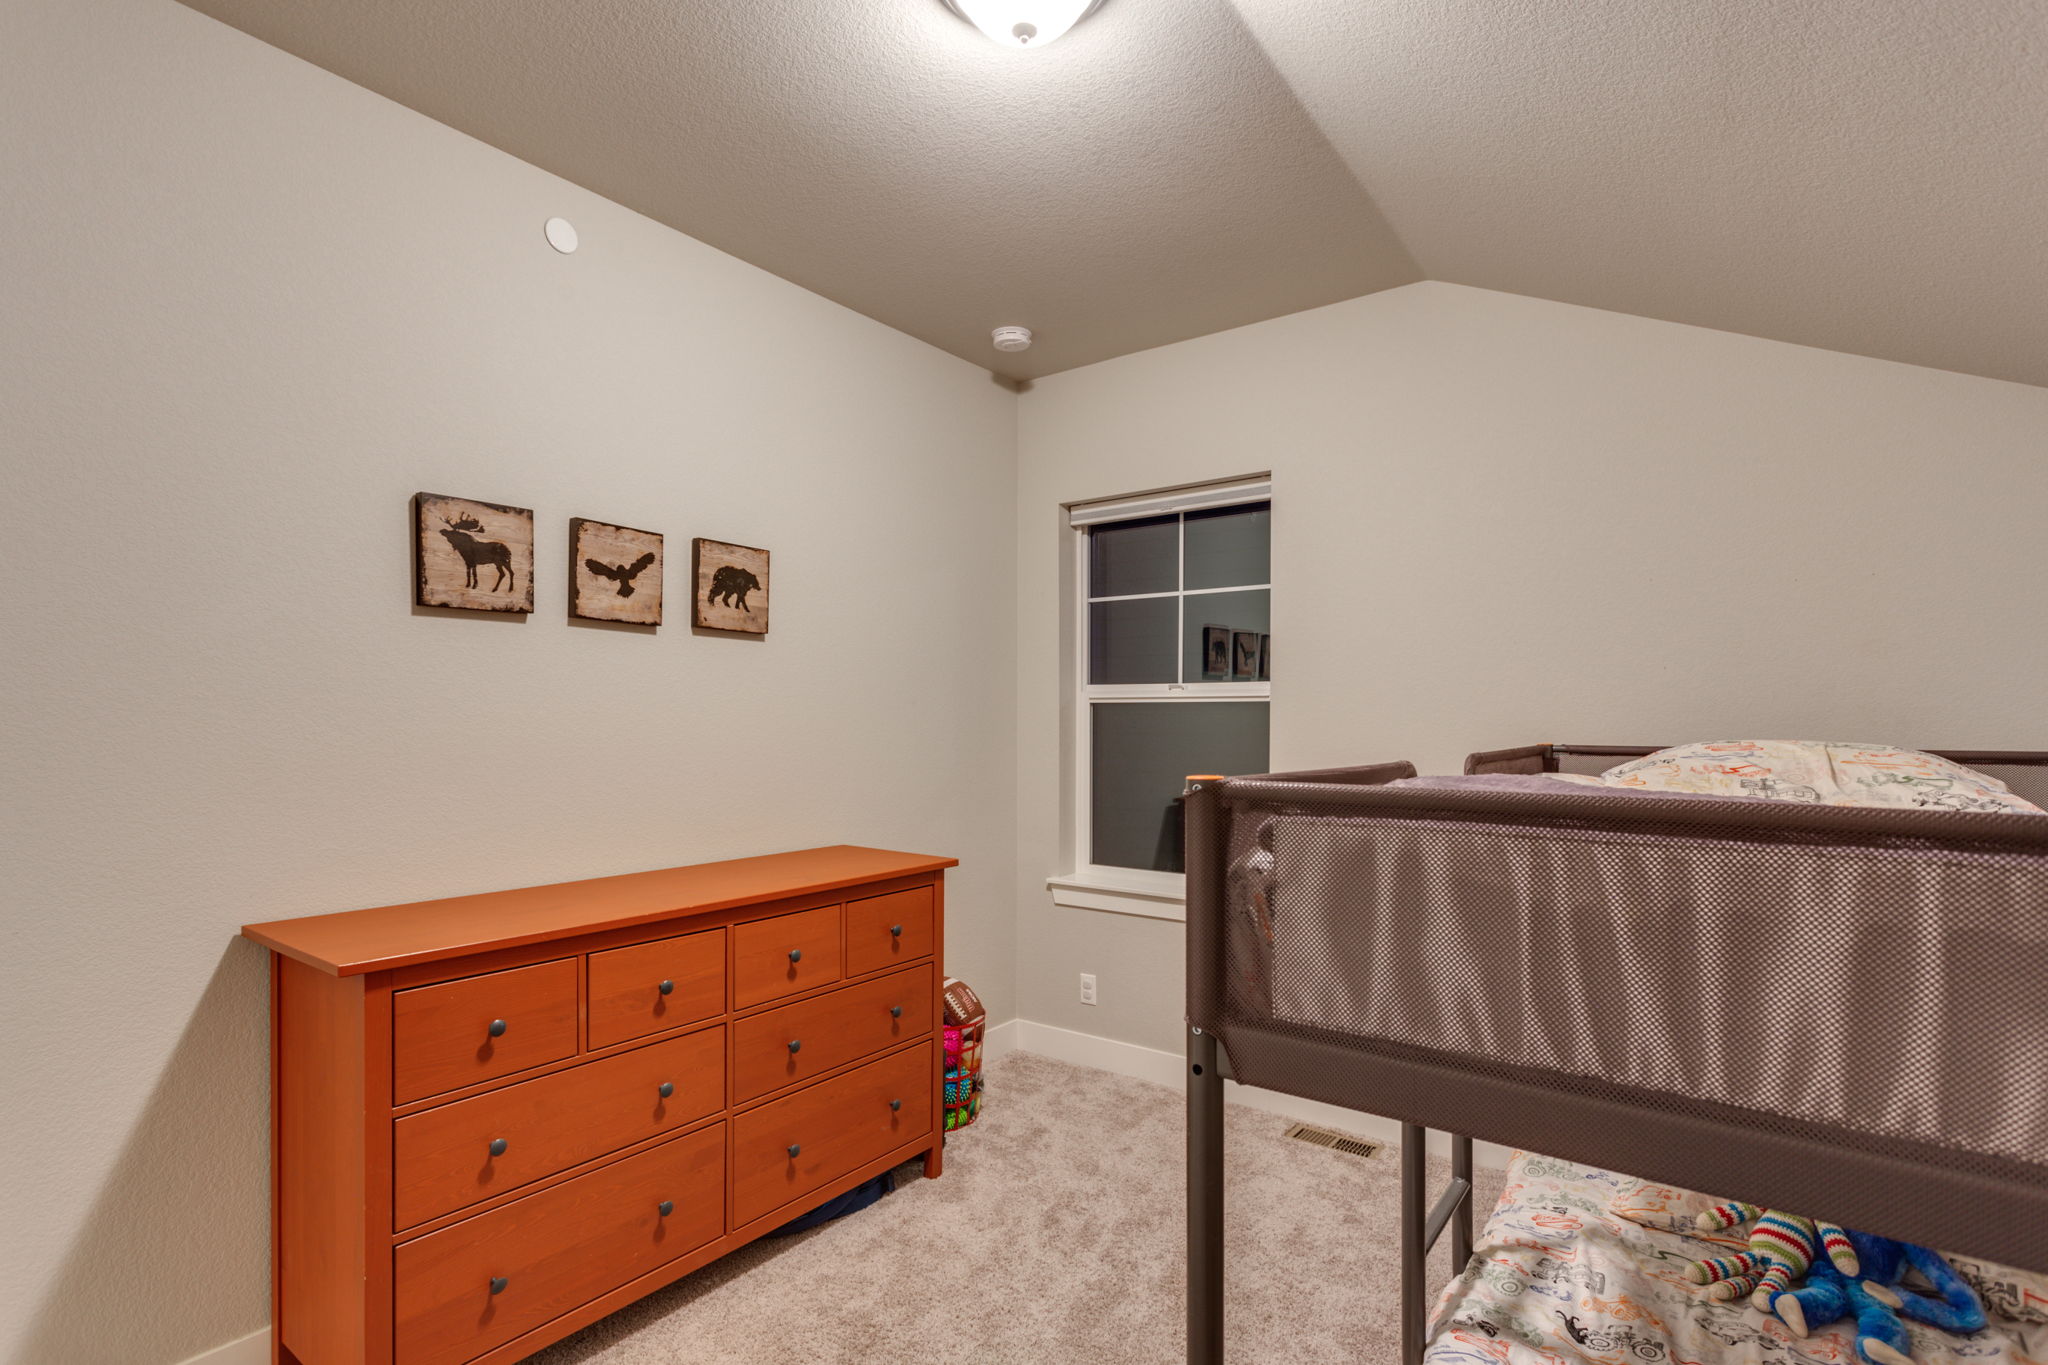  5643 W 96th Ave, Westminster, CO 80020, US Photo 40